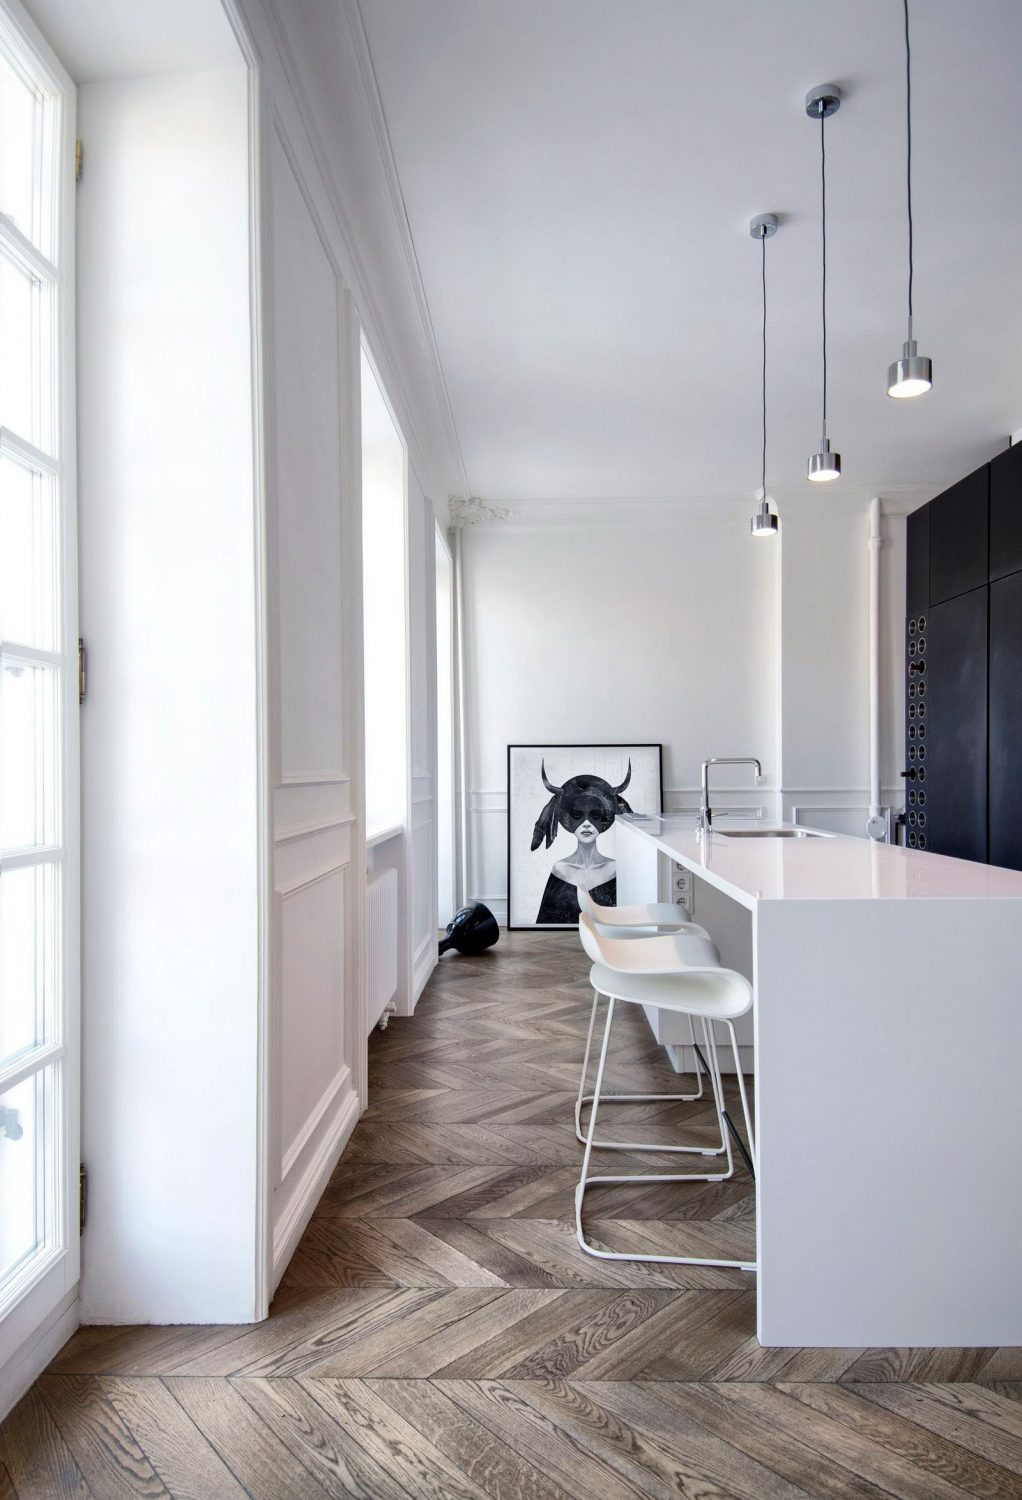 Interior AM – Renovation by INT2 architecture